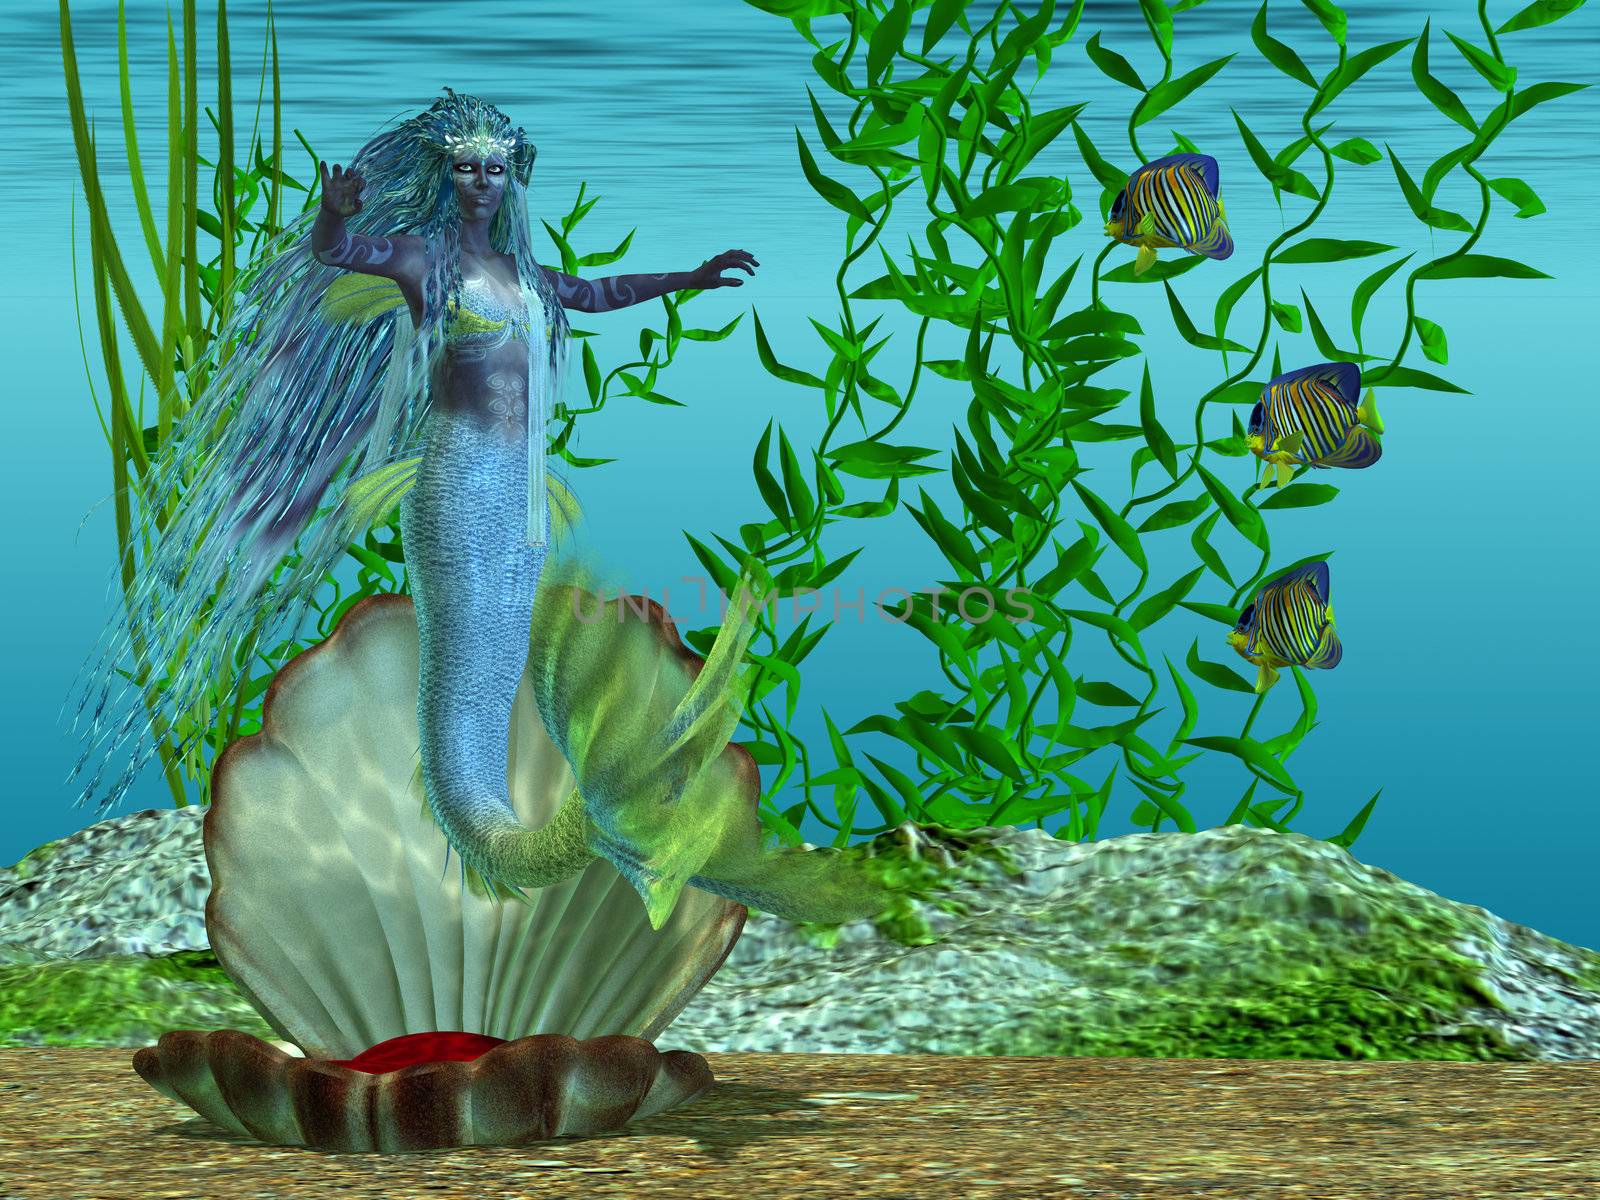 A beautiful blue mermaid arises for her shell bed in the morning under the sea.